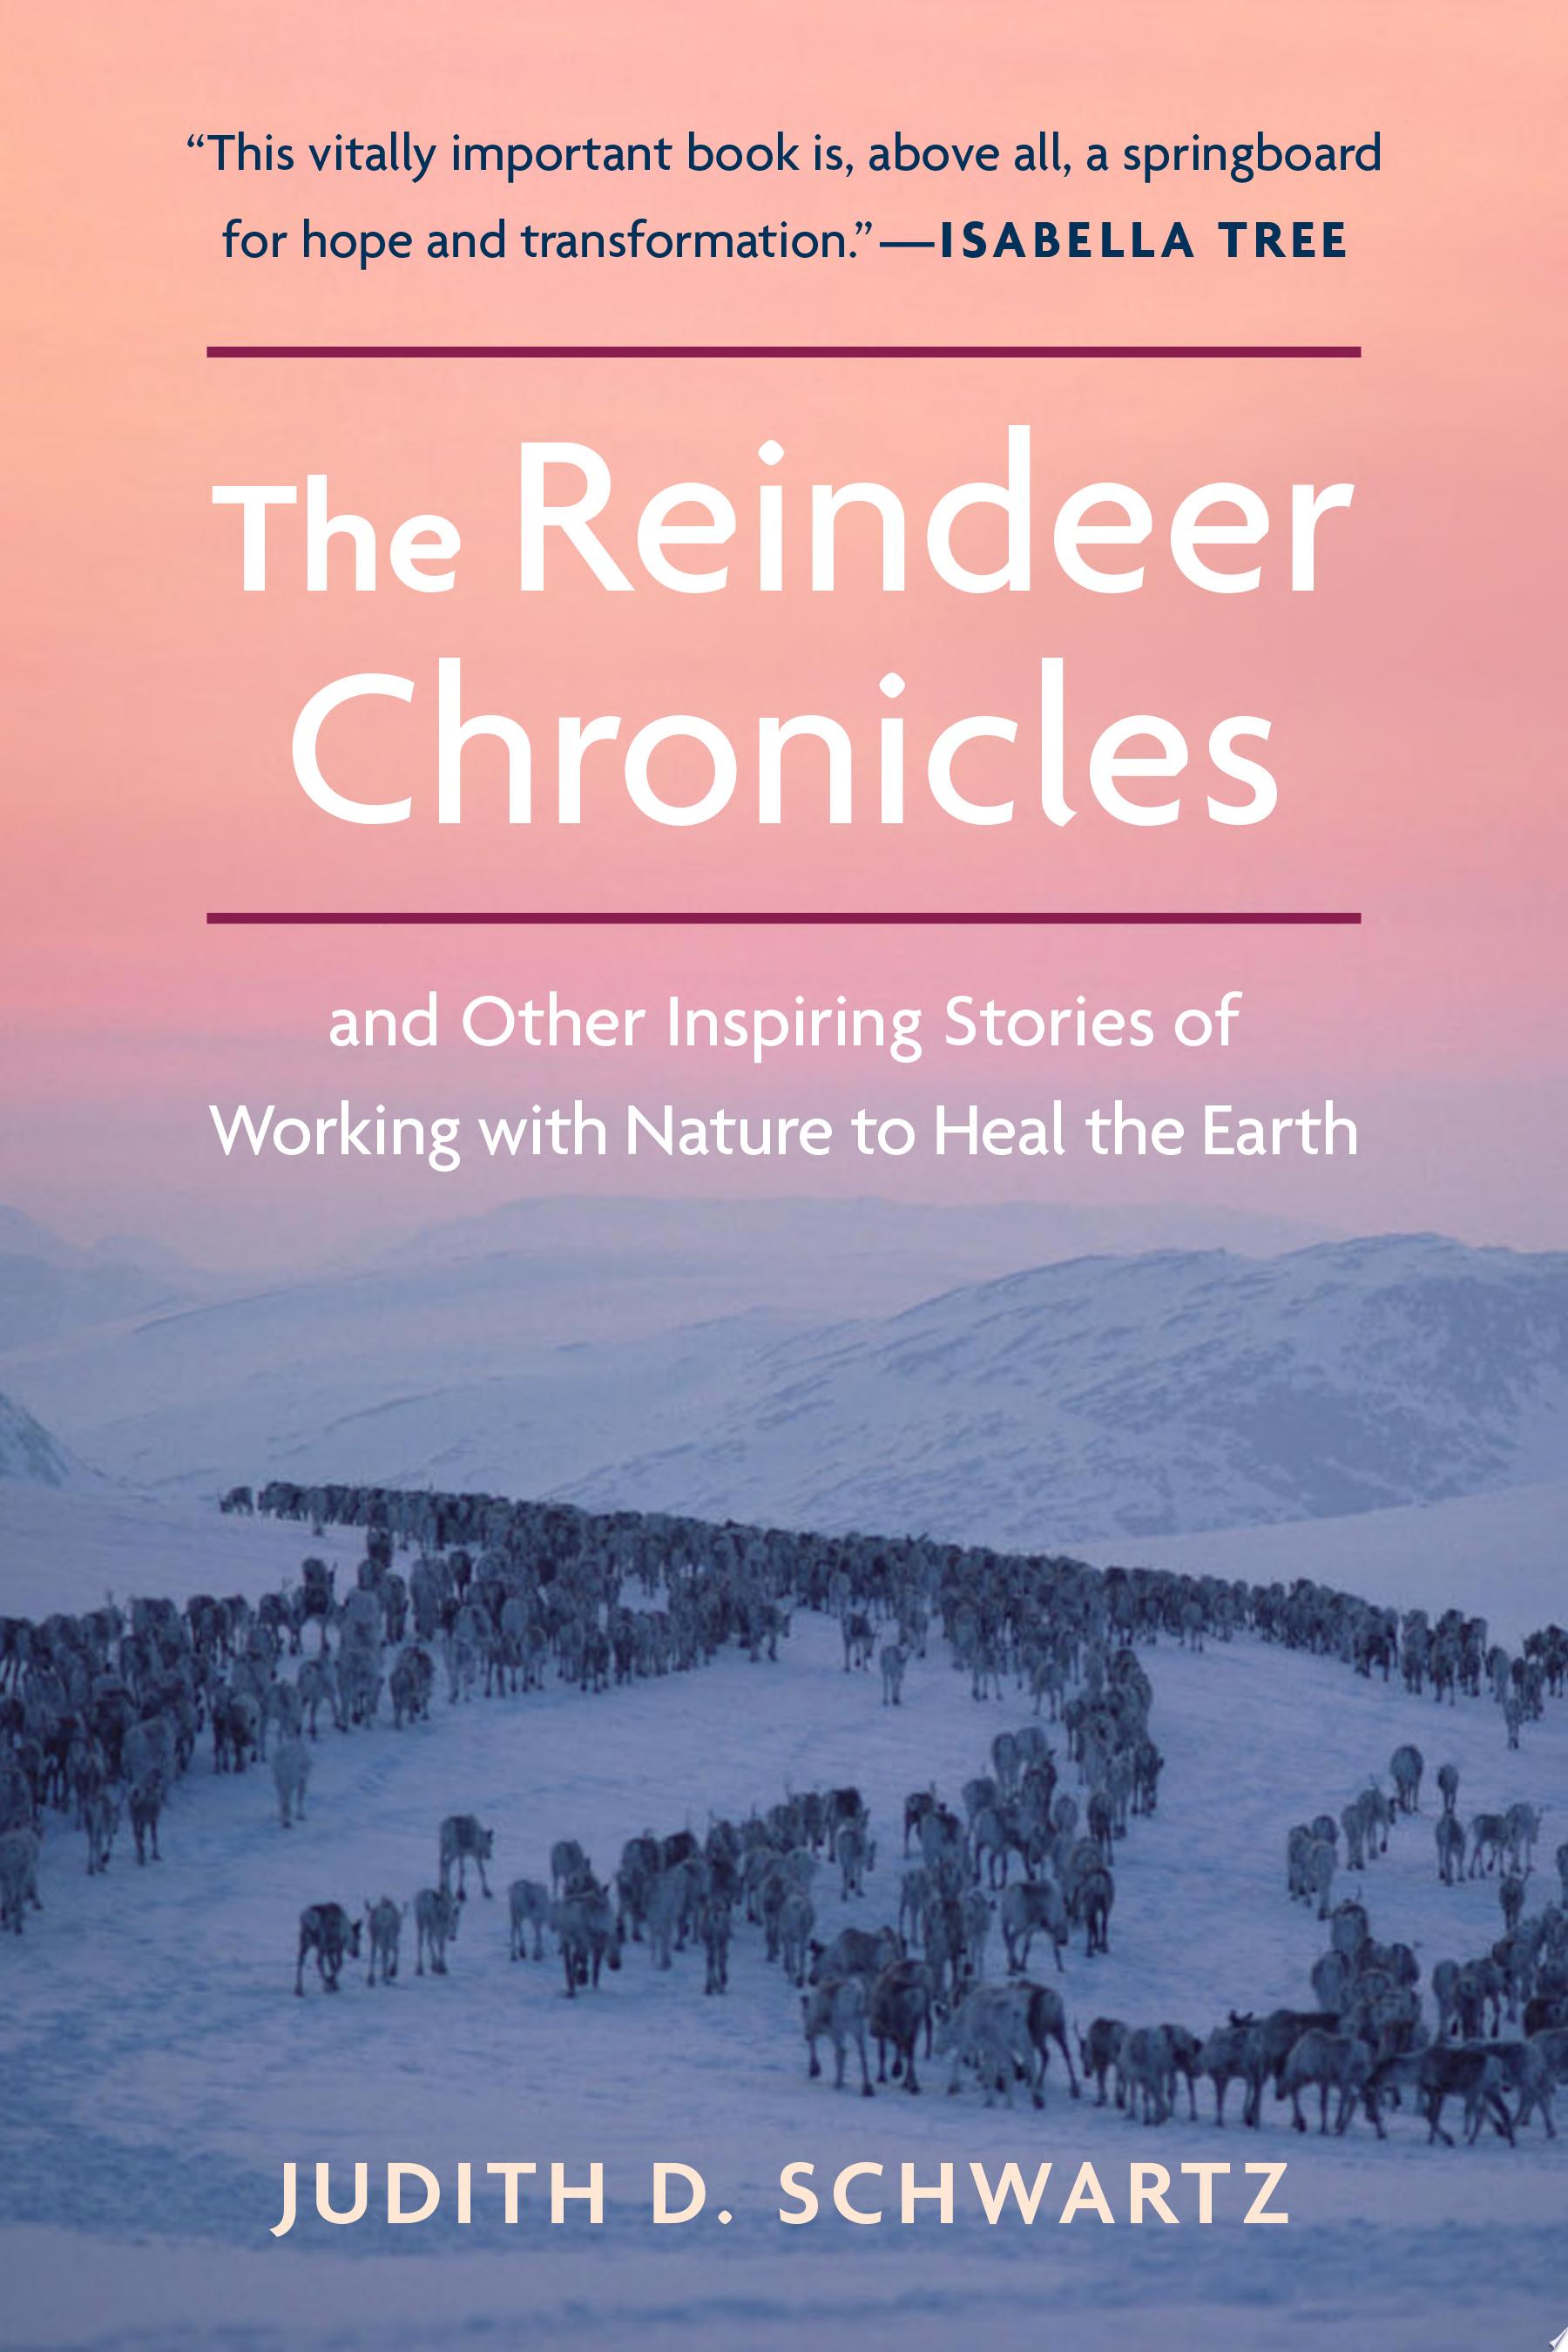 Image for "The Reindeer Chronicles"